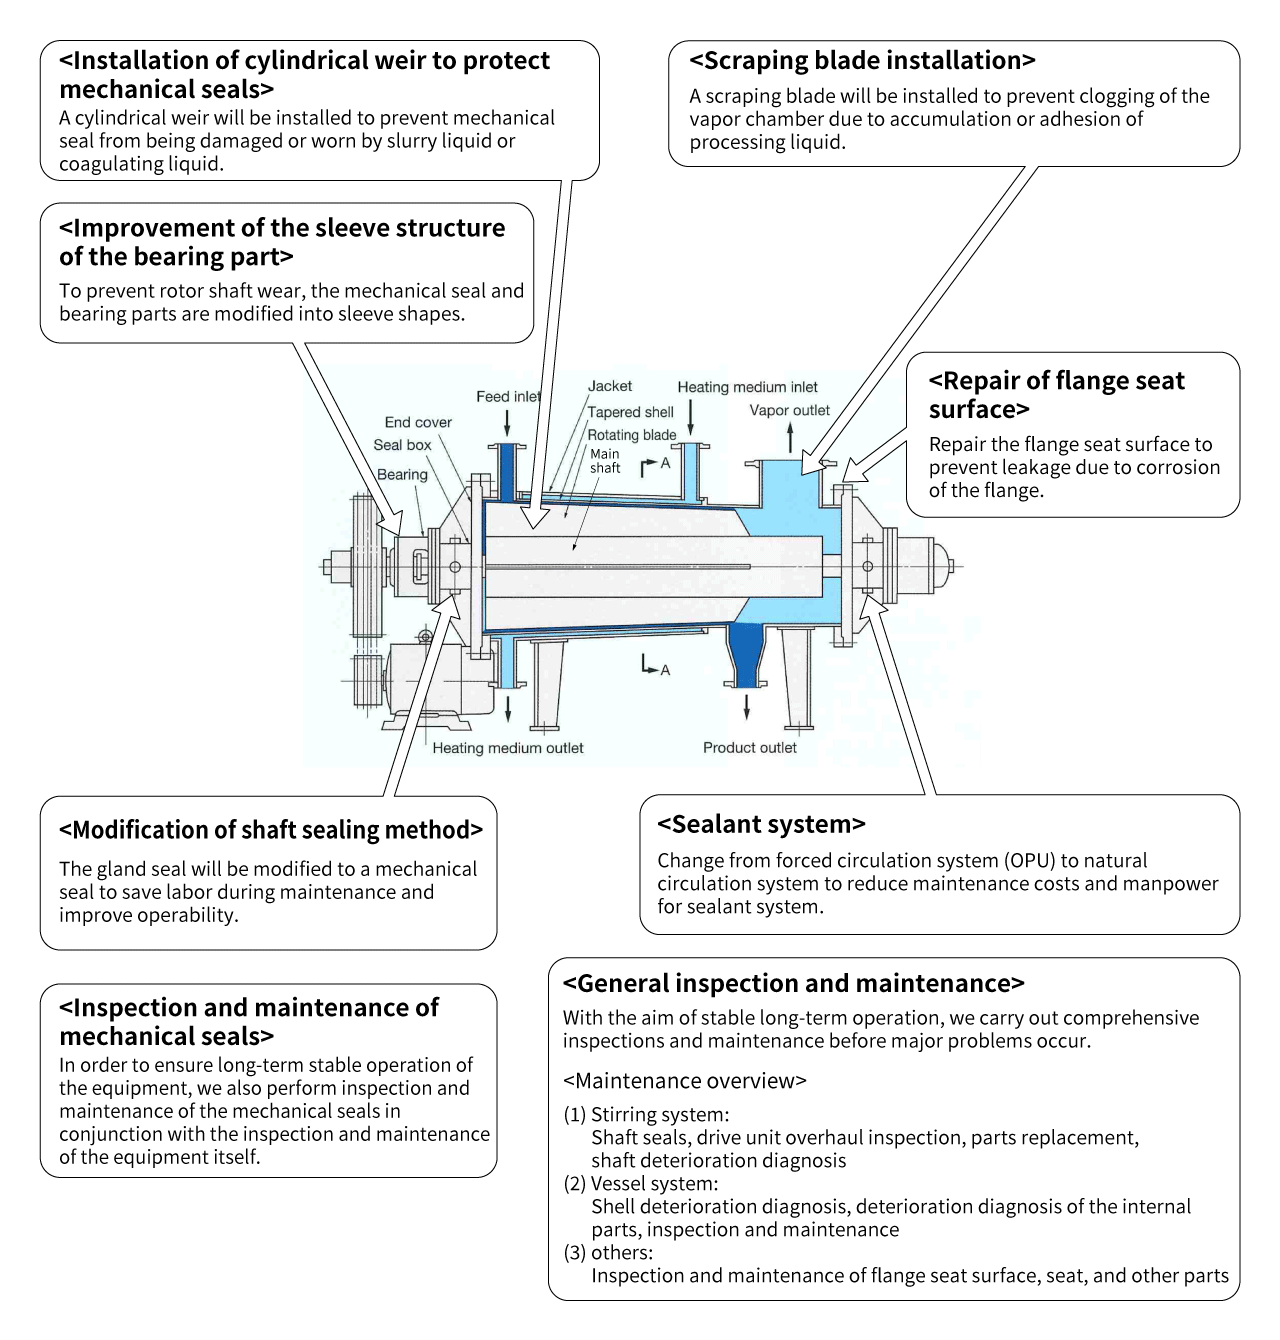 Service recommendation map